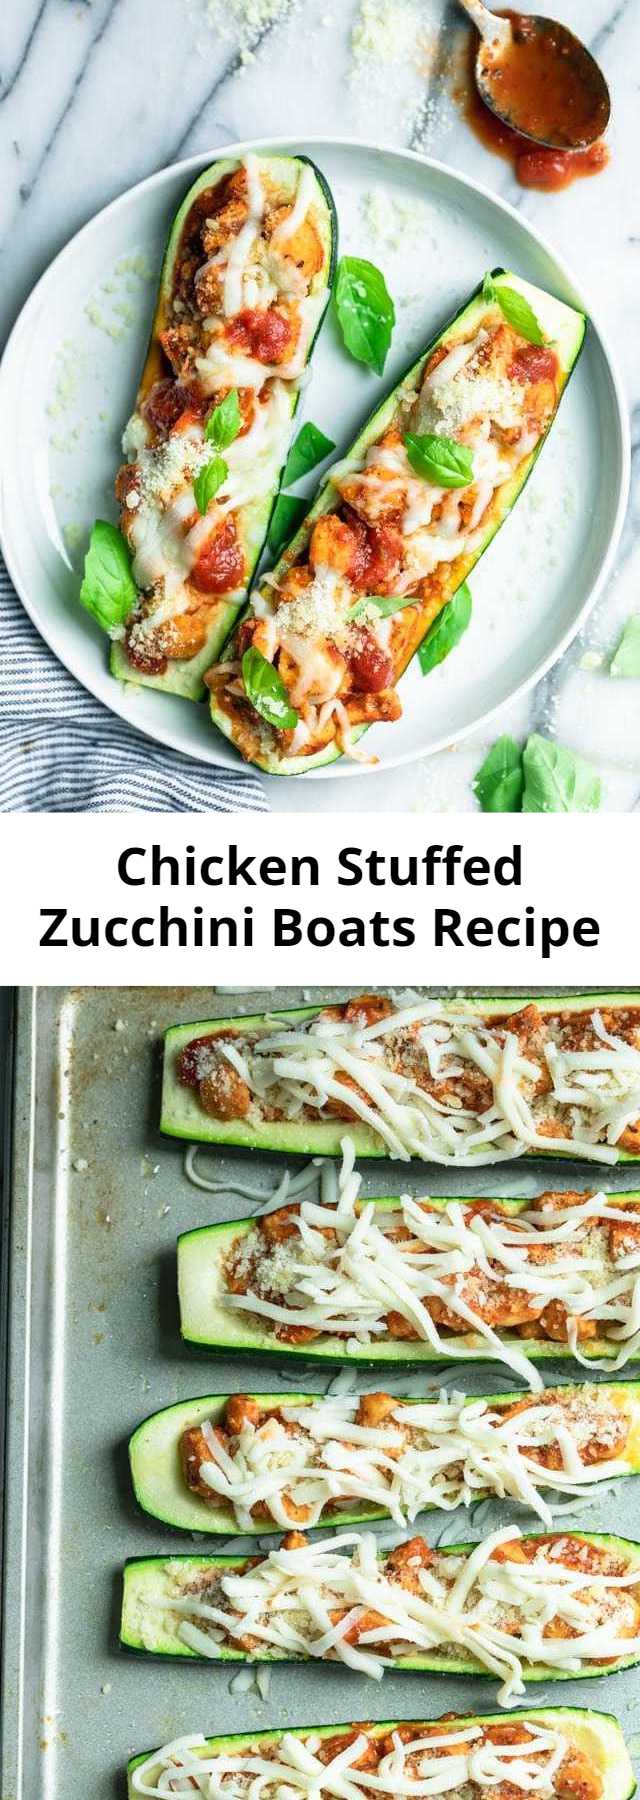 Chicken Stuffed Zucchini Boats Recipe - These Stuffed zucchini boats are easy, Keto friendly and low carb. Stuffed with chicken, marinara and topped with cheese, they make a quick and easy meal. #whole30 #keto #lowcarb #dinner #healthy